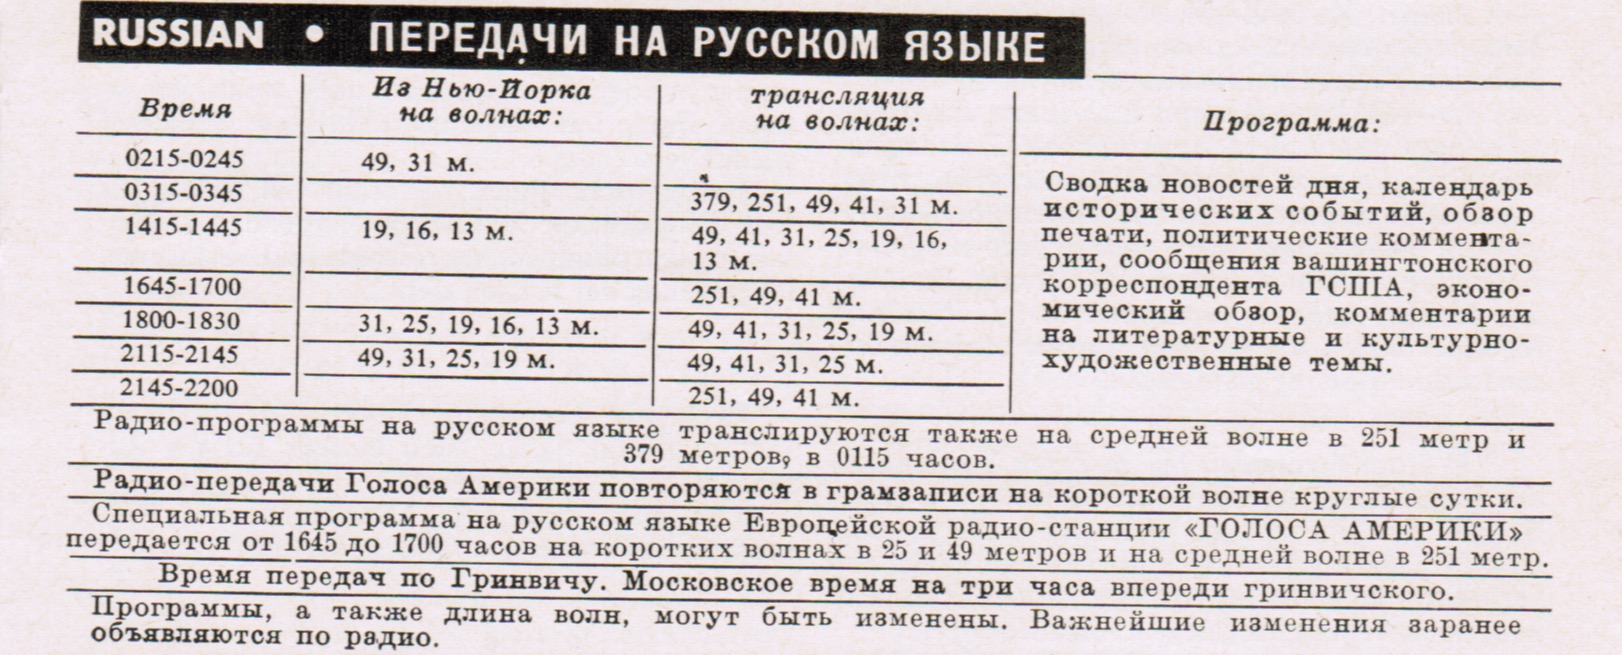 VOA Russian broadcasts listed in "Die Stimme Amerikas" German Service January-February 1953 promotional pamphlet.